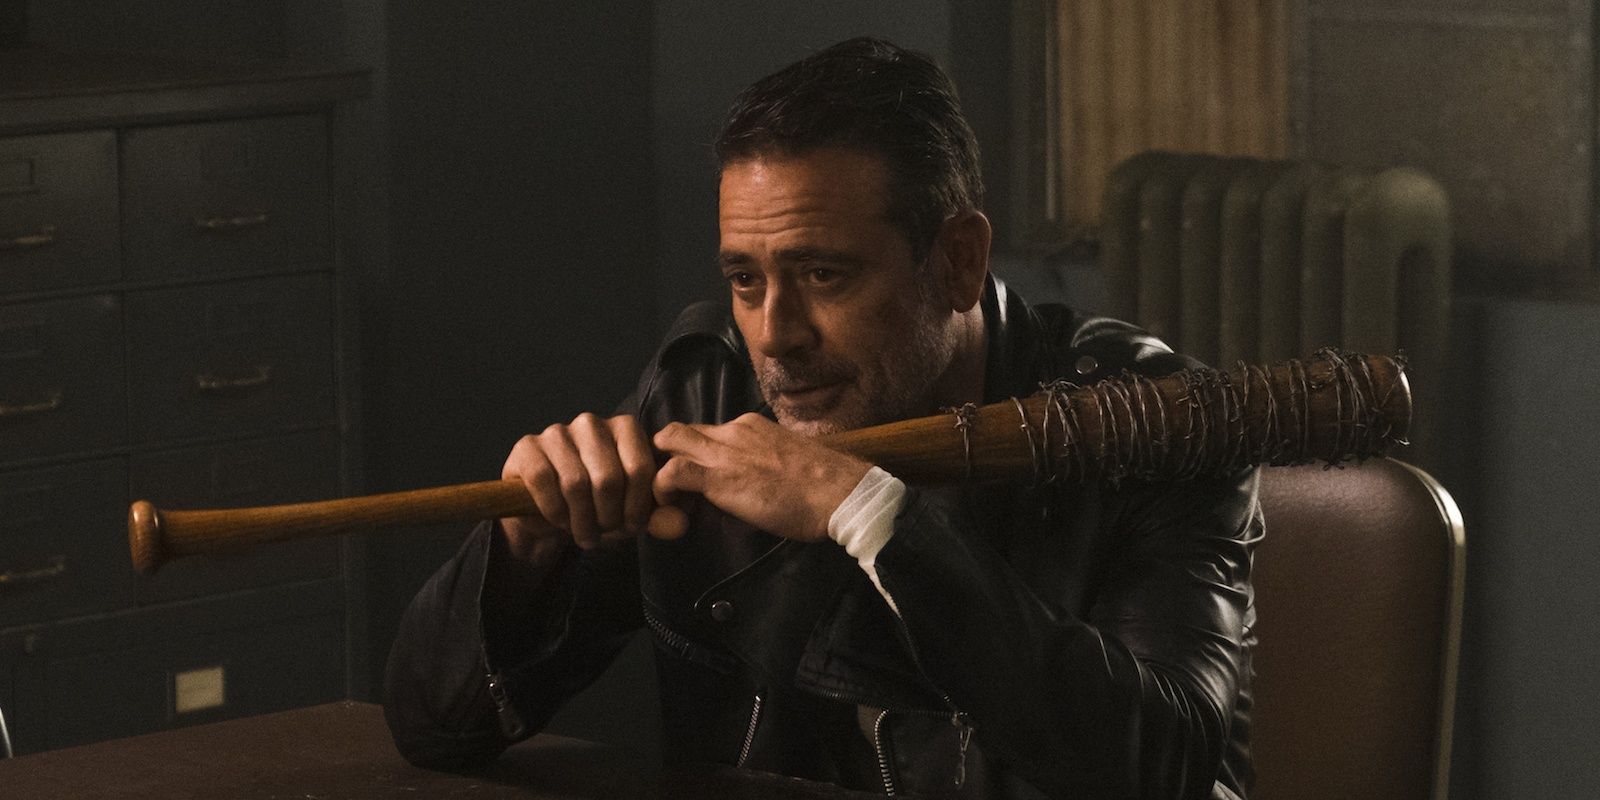 Negan sitting in a chair holding Lucille in Walking Dead.